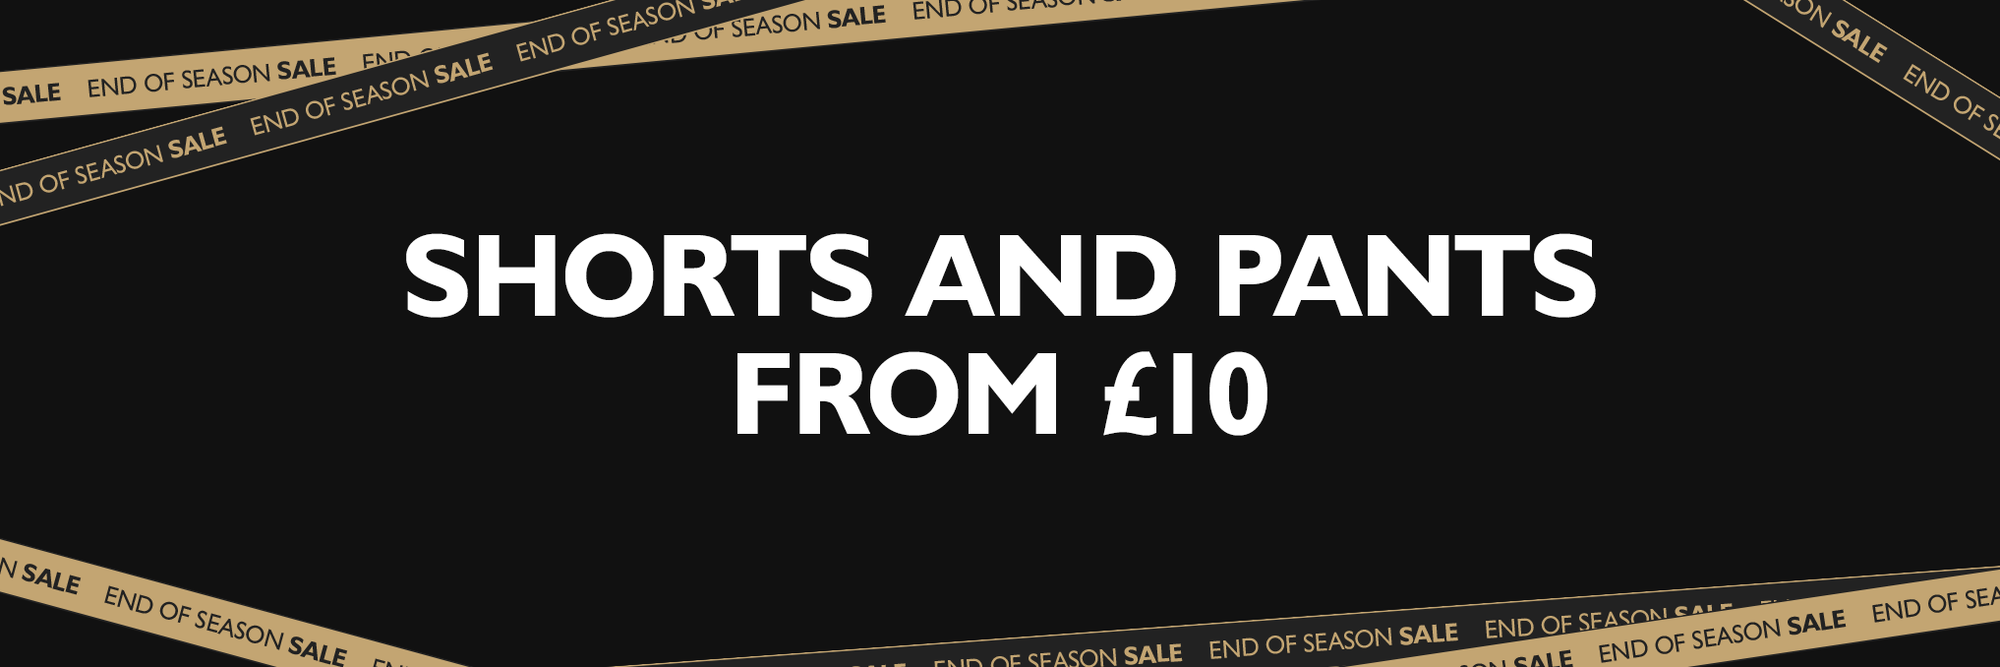 23/24 End of Season Sale - Shorts and Pants from £10